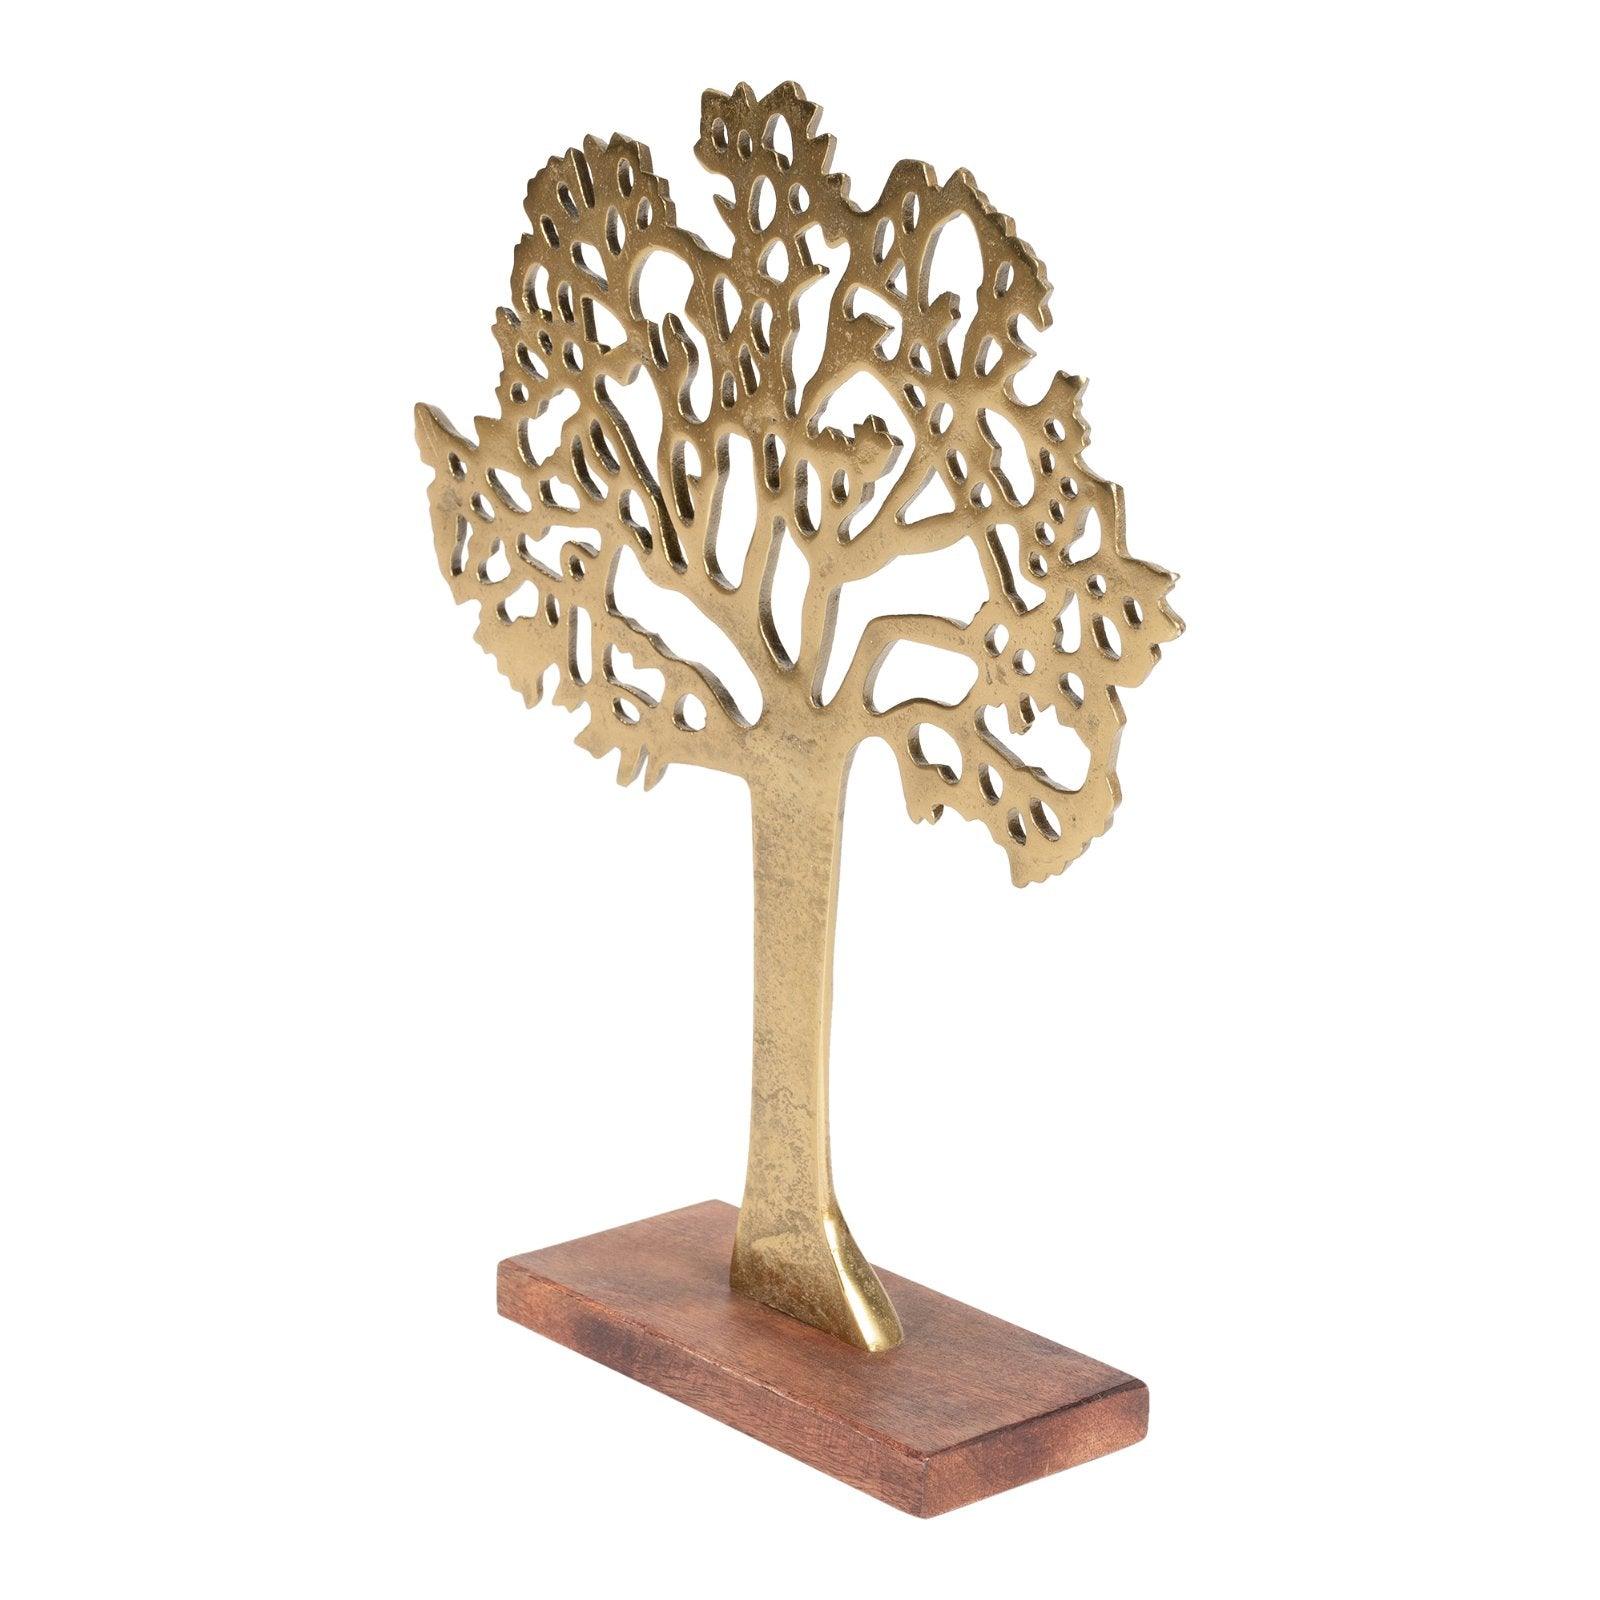 View Antique Gold Tree On Wooden Base Large information